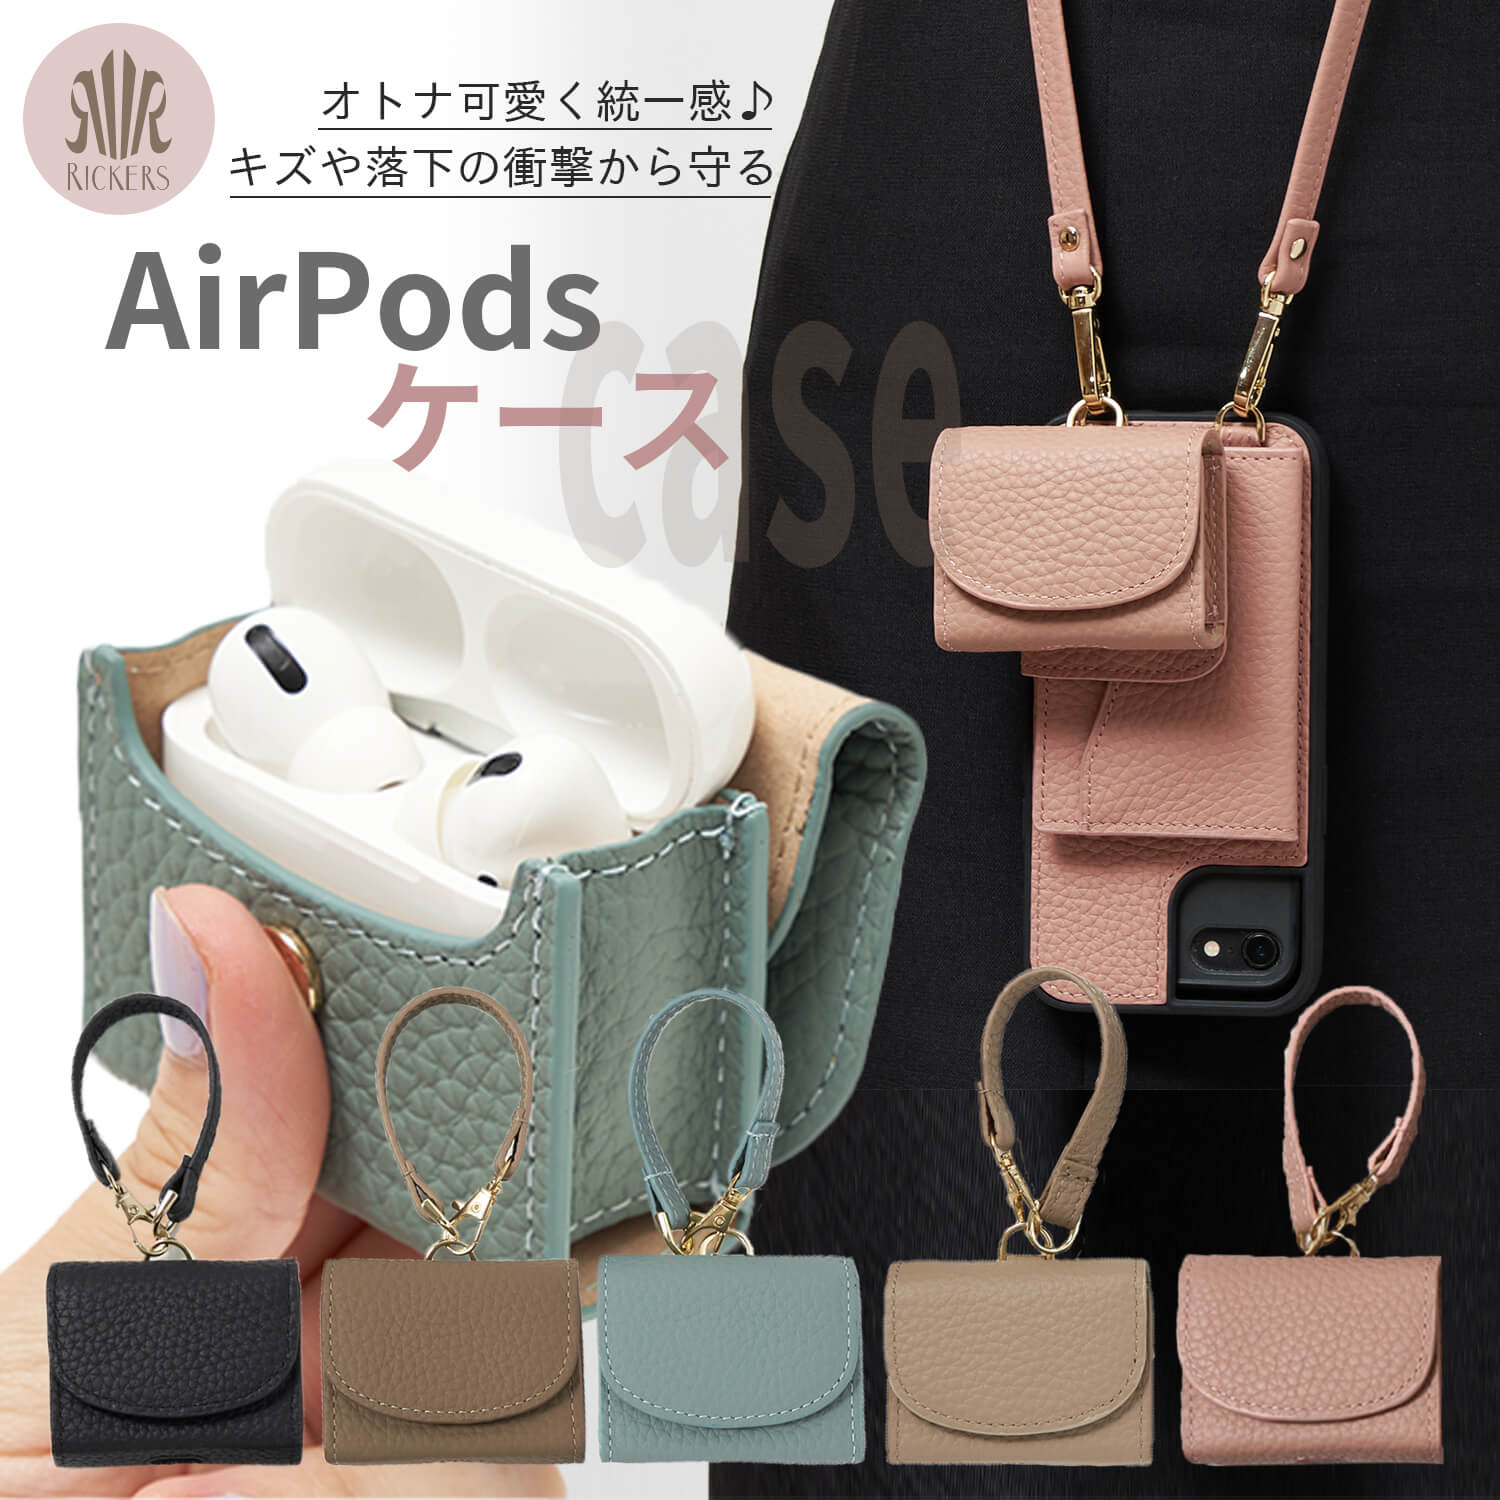 CzP[X AirPods GA[|bY P[X pro 񐢑 O  {v Jo[ CX L CzȊȌɂ AirPods1 2 3 airpods pro RICKERS